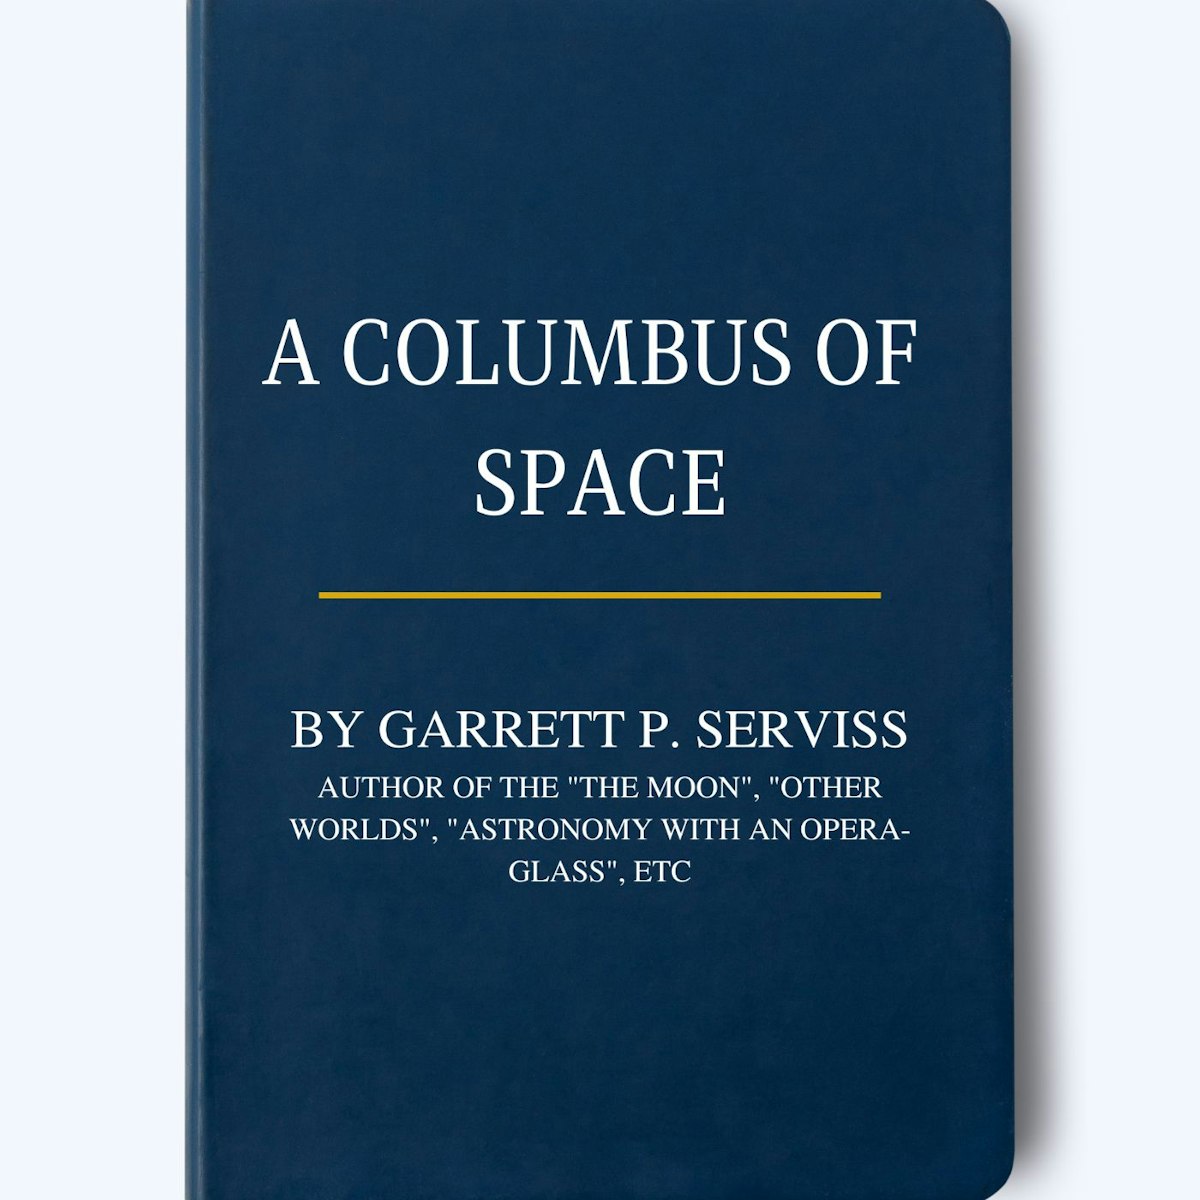 featured image - A Columbus of Space by Garrett Putman Serviss - Table of Links